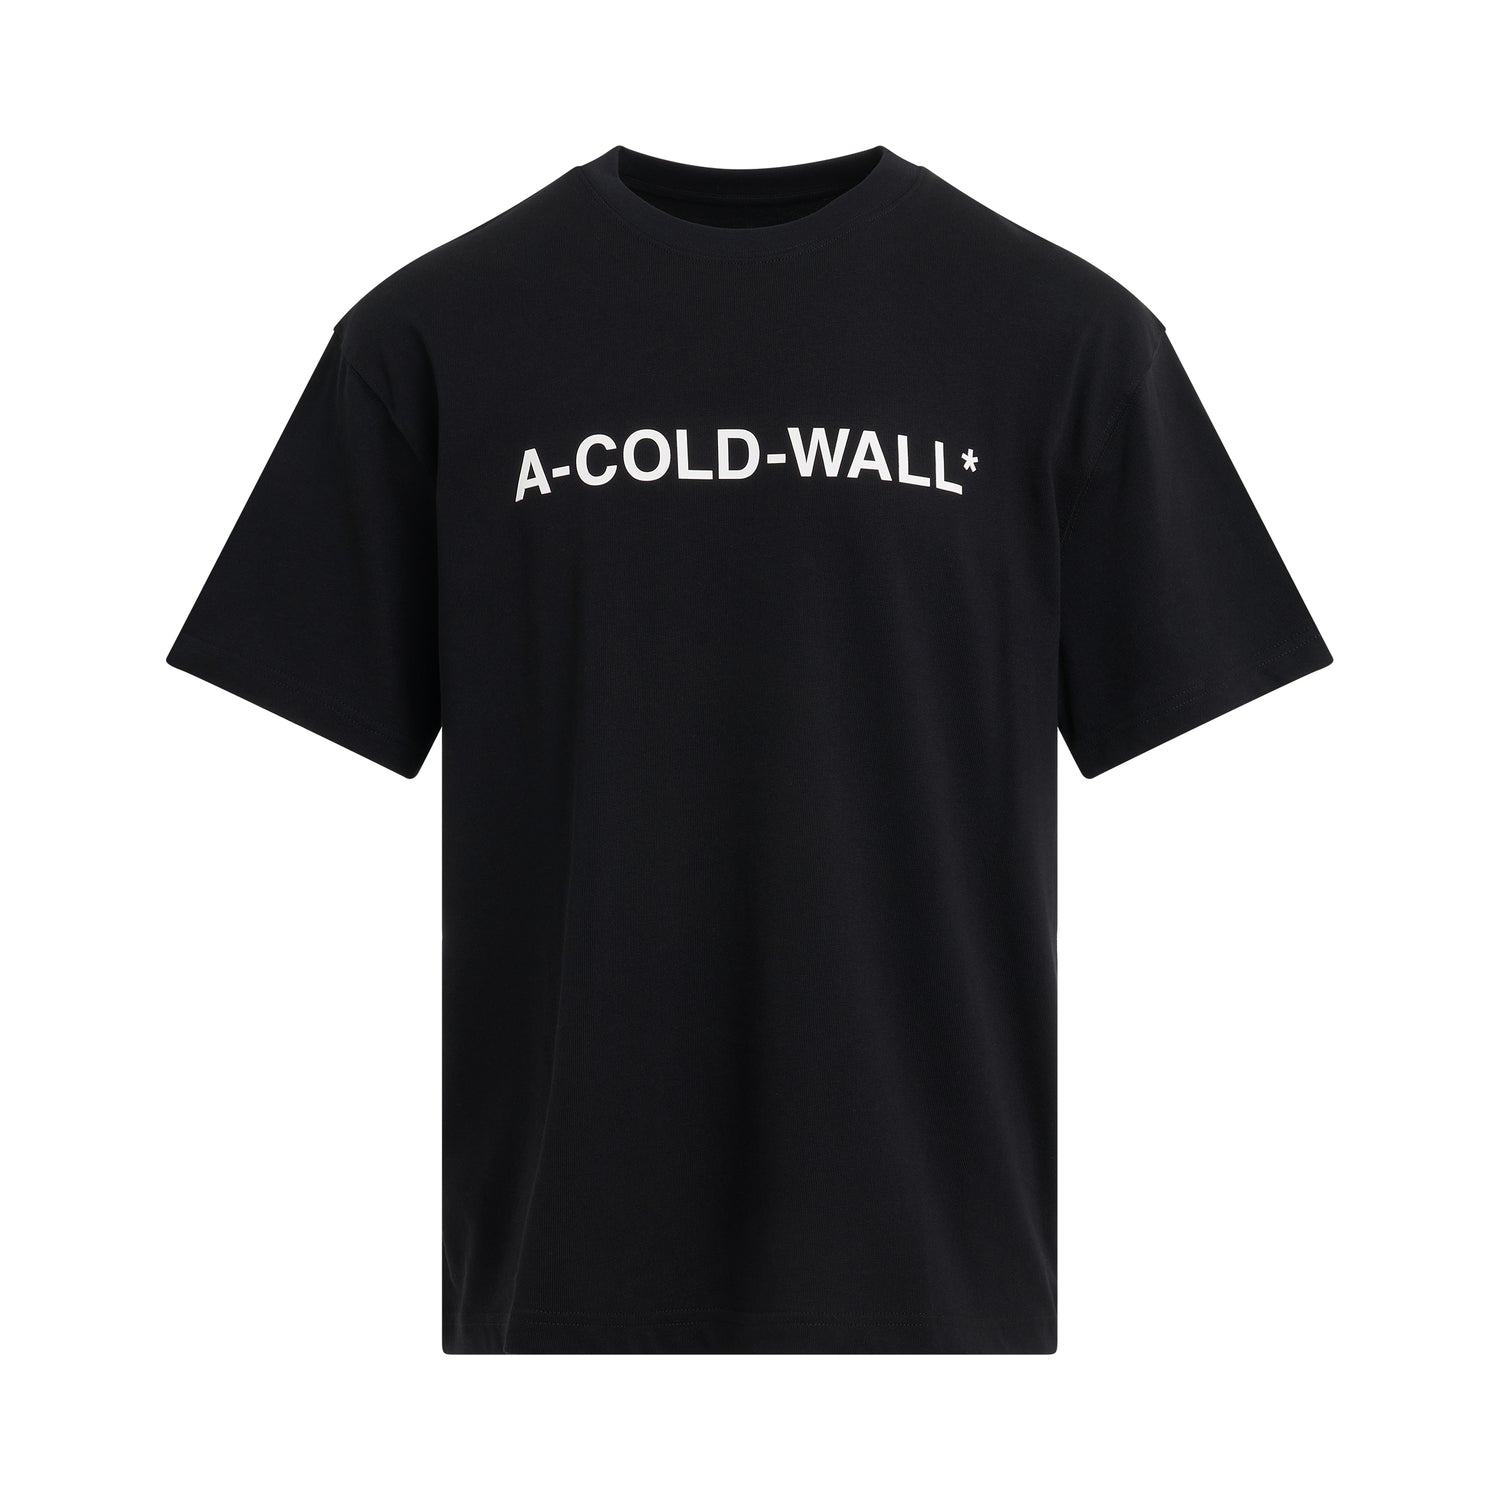 A-COLD-WALL* Clothing